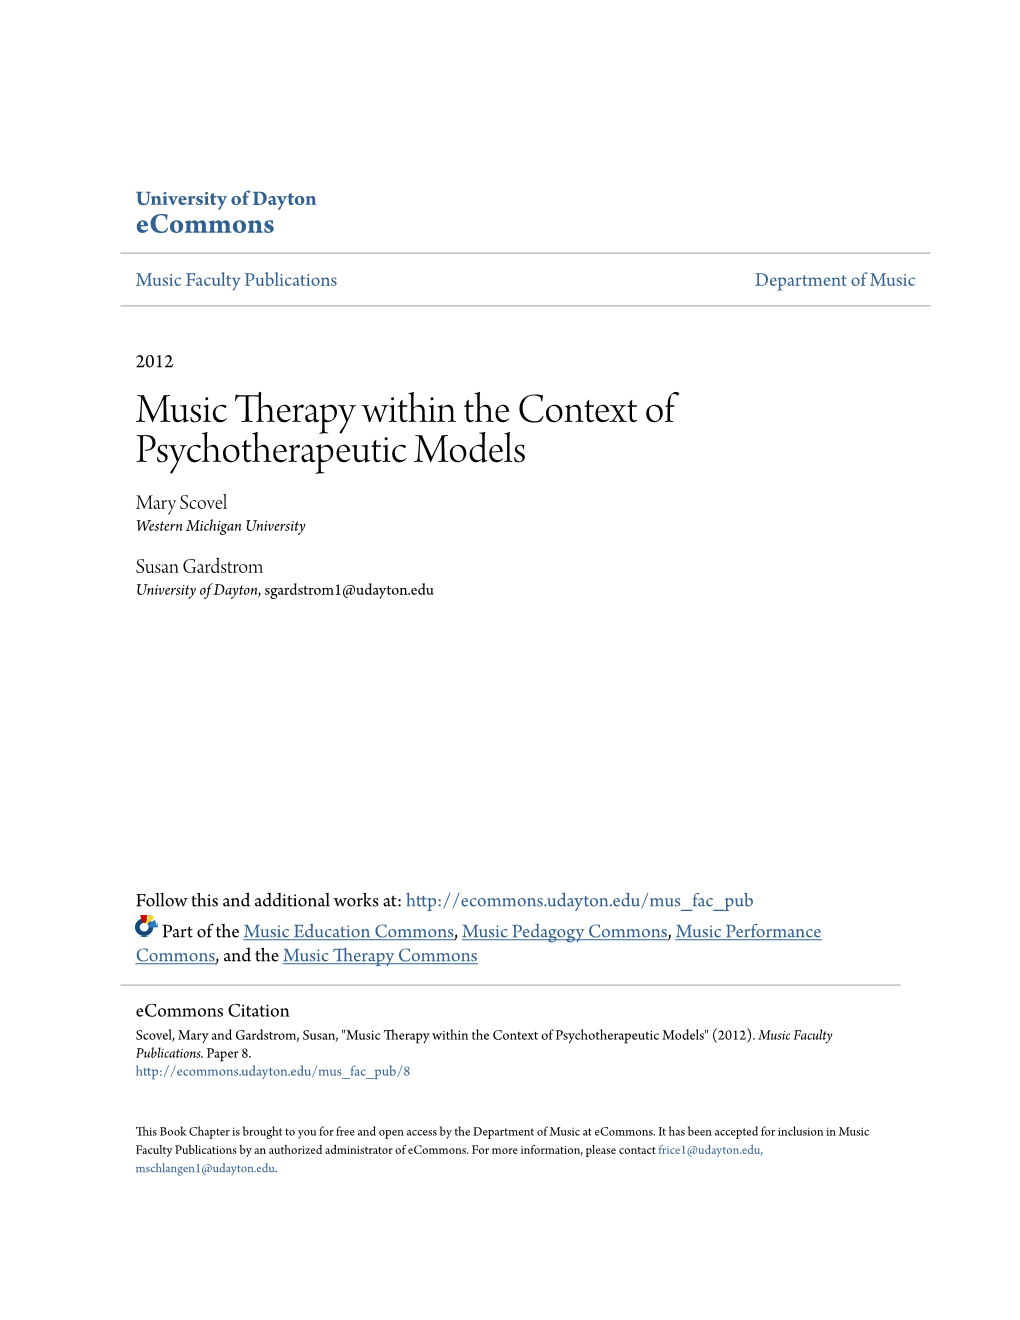 Music Therapy Within the Context of Psychotherapeutic Models Mary Scovel Western Michigan University